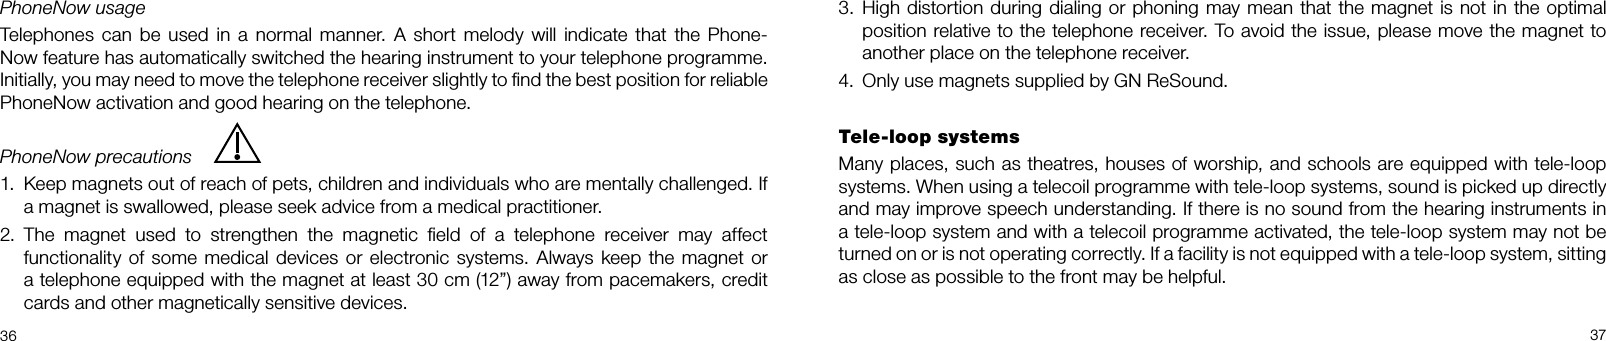  36 37PhoneNow usageTelephones can be used in a normal manner. A short melody will indicate that the Phone-Now feature has automatically switched the hearing instrument to your telephone programme.  Initially, you may need to move the telephone receiver slightly to ﬁnd the best position for reliable PhoneNow activation and good hearing on the telephone. PhoneNow precautions1.  Keep magnets out of reach of pets, children and individuals who are mentally challenged. If a magnet is swallowed, please seek advice from a medical practitioner.2.  The magnet used to strengthen the magnetic ﬁeld of a telephone receiver may affect functionality of some medical devices or electronic systems. Always keep the magnet or a telephone equipped with the magnet at least 30 cm (12”) away from pacemakers, credit cards and other magnetically sensitive devices.3.  High distortion during dialing or phoning may mean that the magnet is not in the optimal position relative to the telephone receiver. To avoid the issue, please move the magnet to another place on the telephone receiver.4.  Only use magnets supplied by GN ReSound.Tele-loop systemsMany places, such as theatres, houses of worship, and schools are equipped with tele-loop systems. When using a telecoil programme with tele-loop systems, sound is picked up directly and may improve speech understanding. If there is no sound from the hearing instruments in a tele-loop system and with a telecoil programme activated, the tele-loop system may not be turned on or is not operating correctly. If a facility is not equipped with a tele-loop system, sitting as close as possible to the front may be helpful.